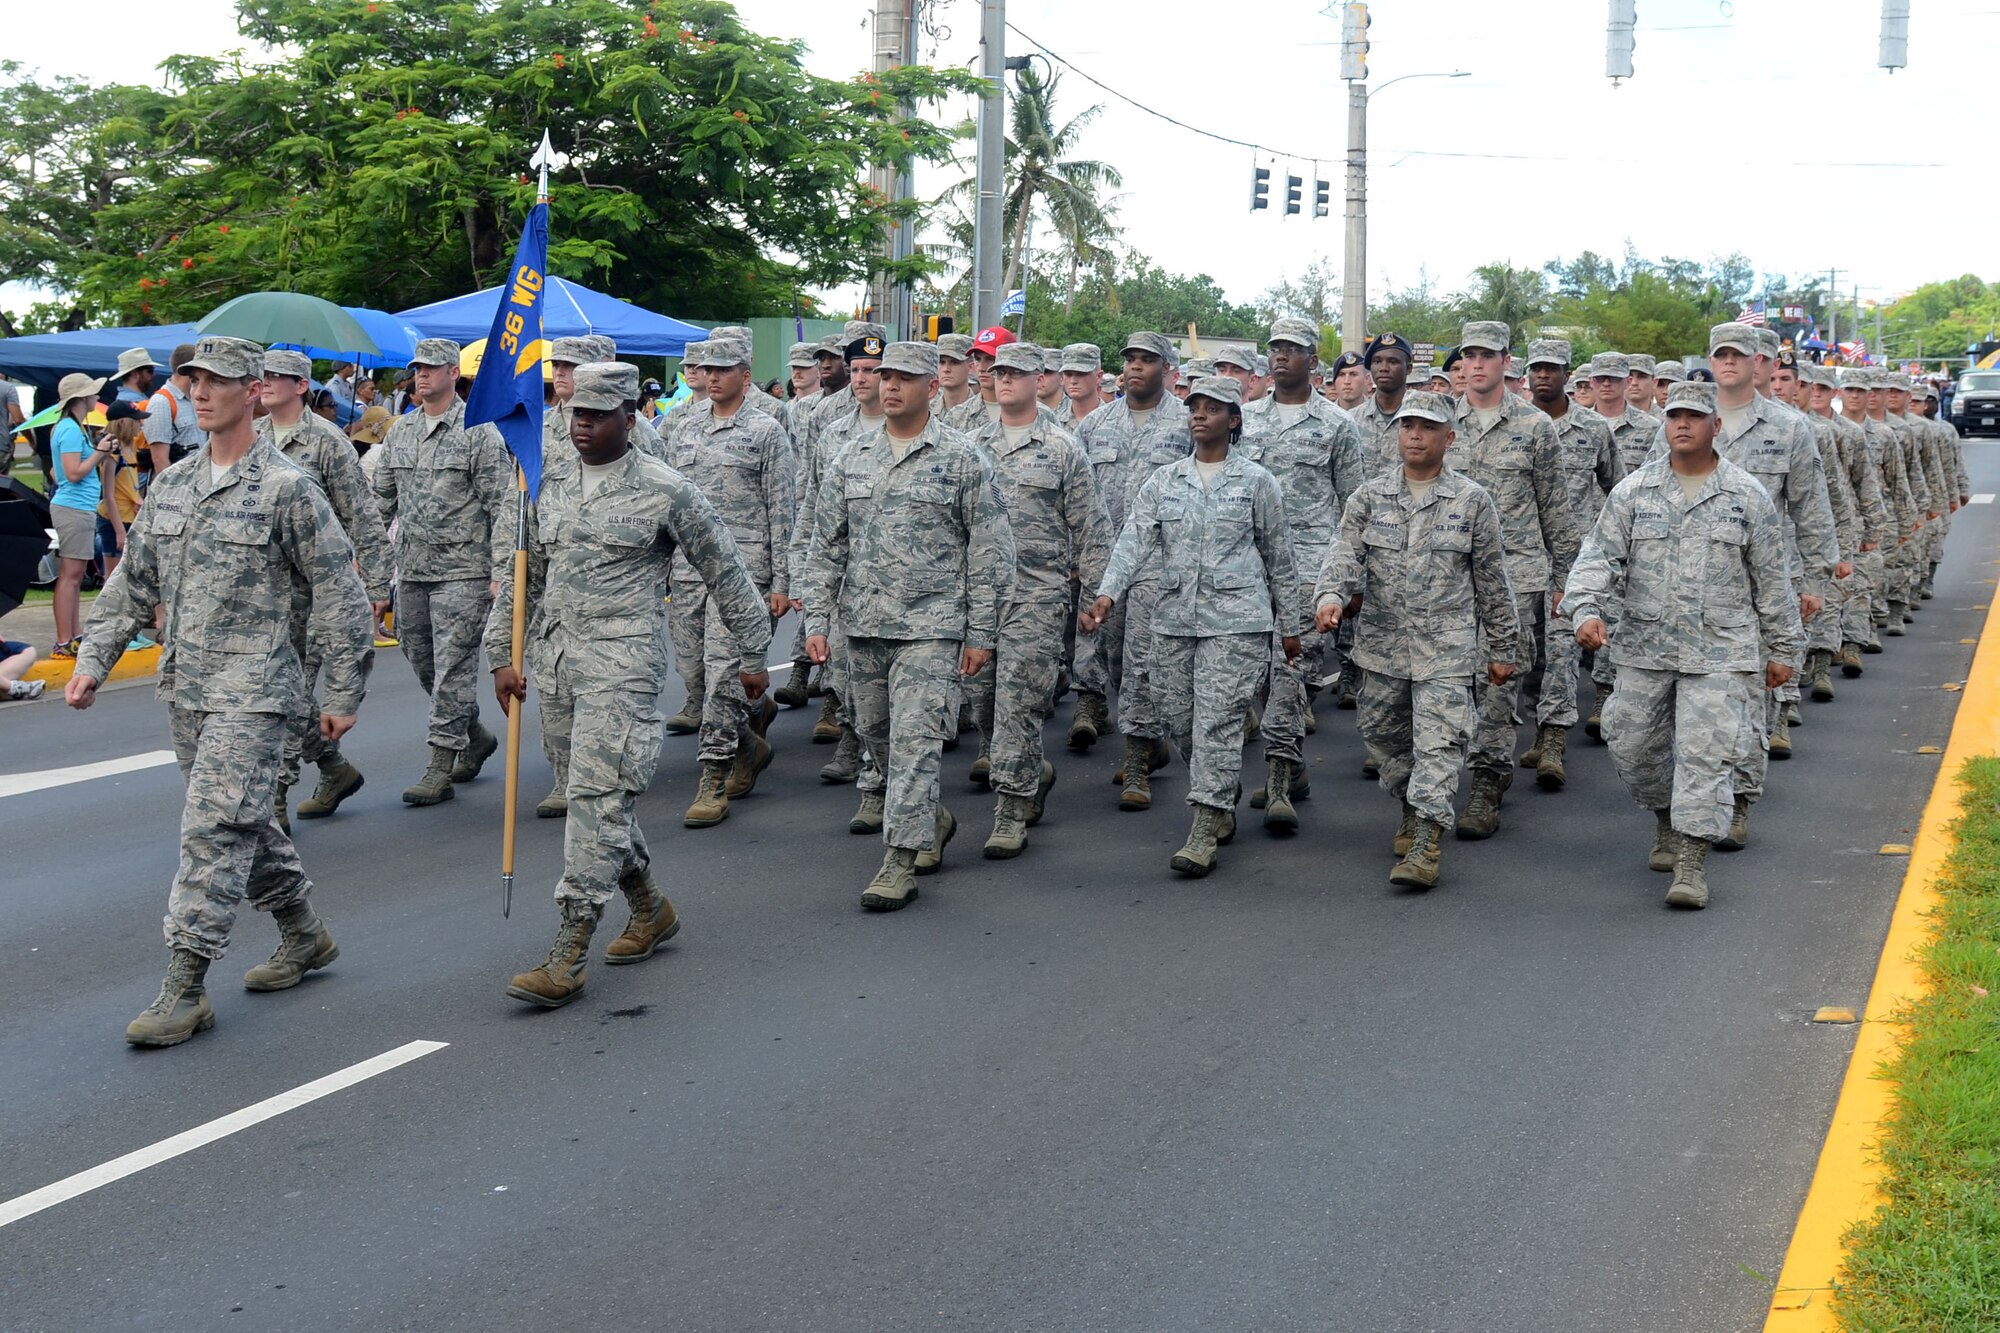 Airmen from Andersen Air Force Base march in the Liberation Day Parade July 21, 2015, in Hagåtña, Guam. Formations of active-duty service members, guardsmen and reservists, including more than 100 Airmen from the 36th Wing, marched in the parade down the 1.2-mile route past thousands of spectators. (U.S. Air Force photo by Airman 1st Class Alexa Ann Henderson/Released)